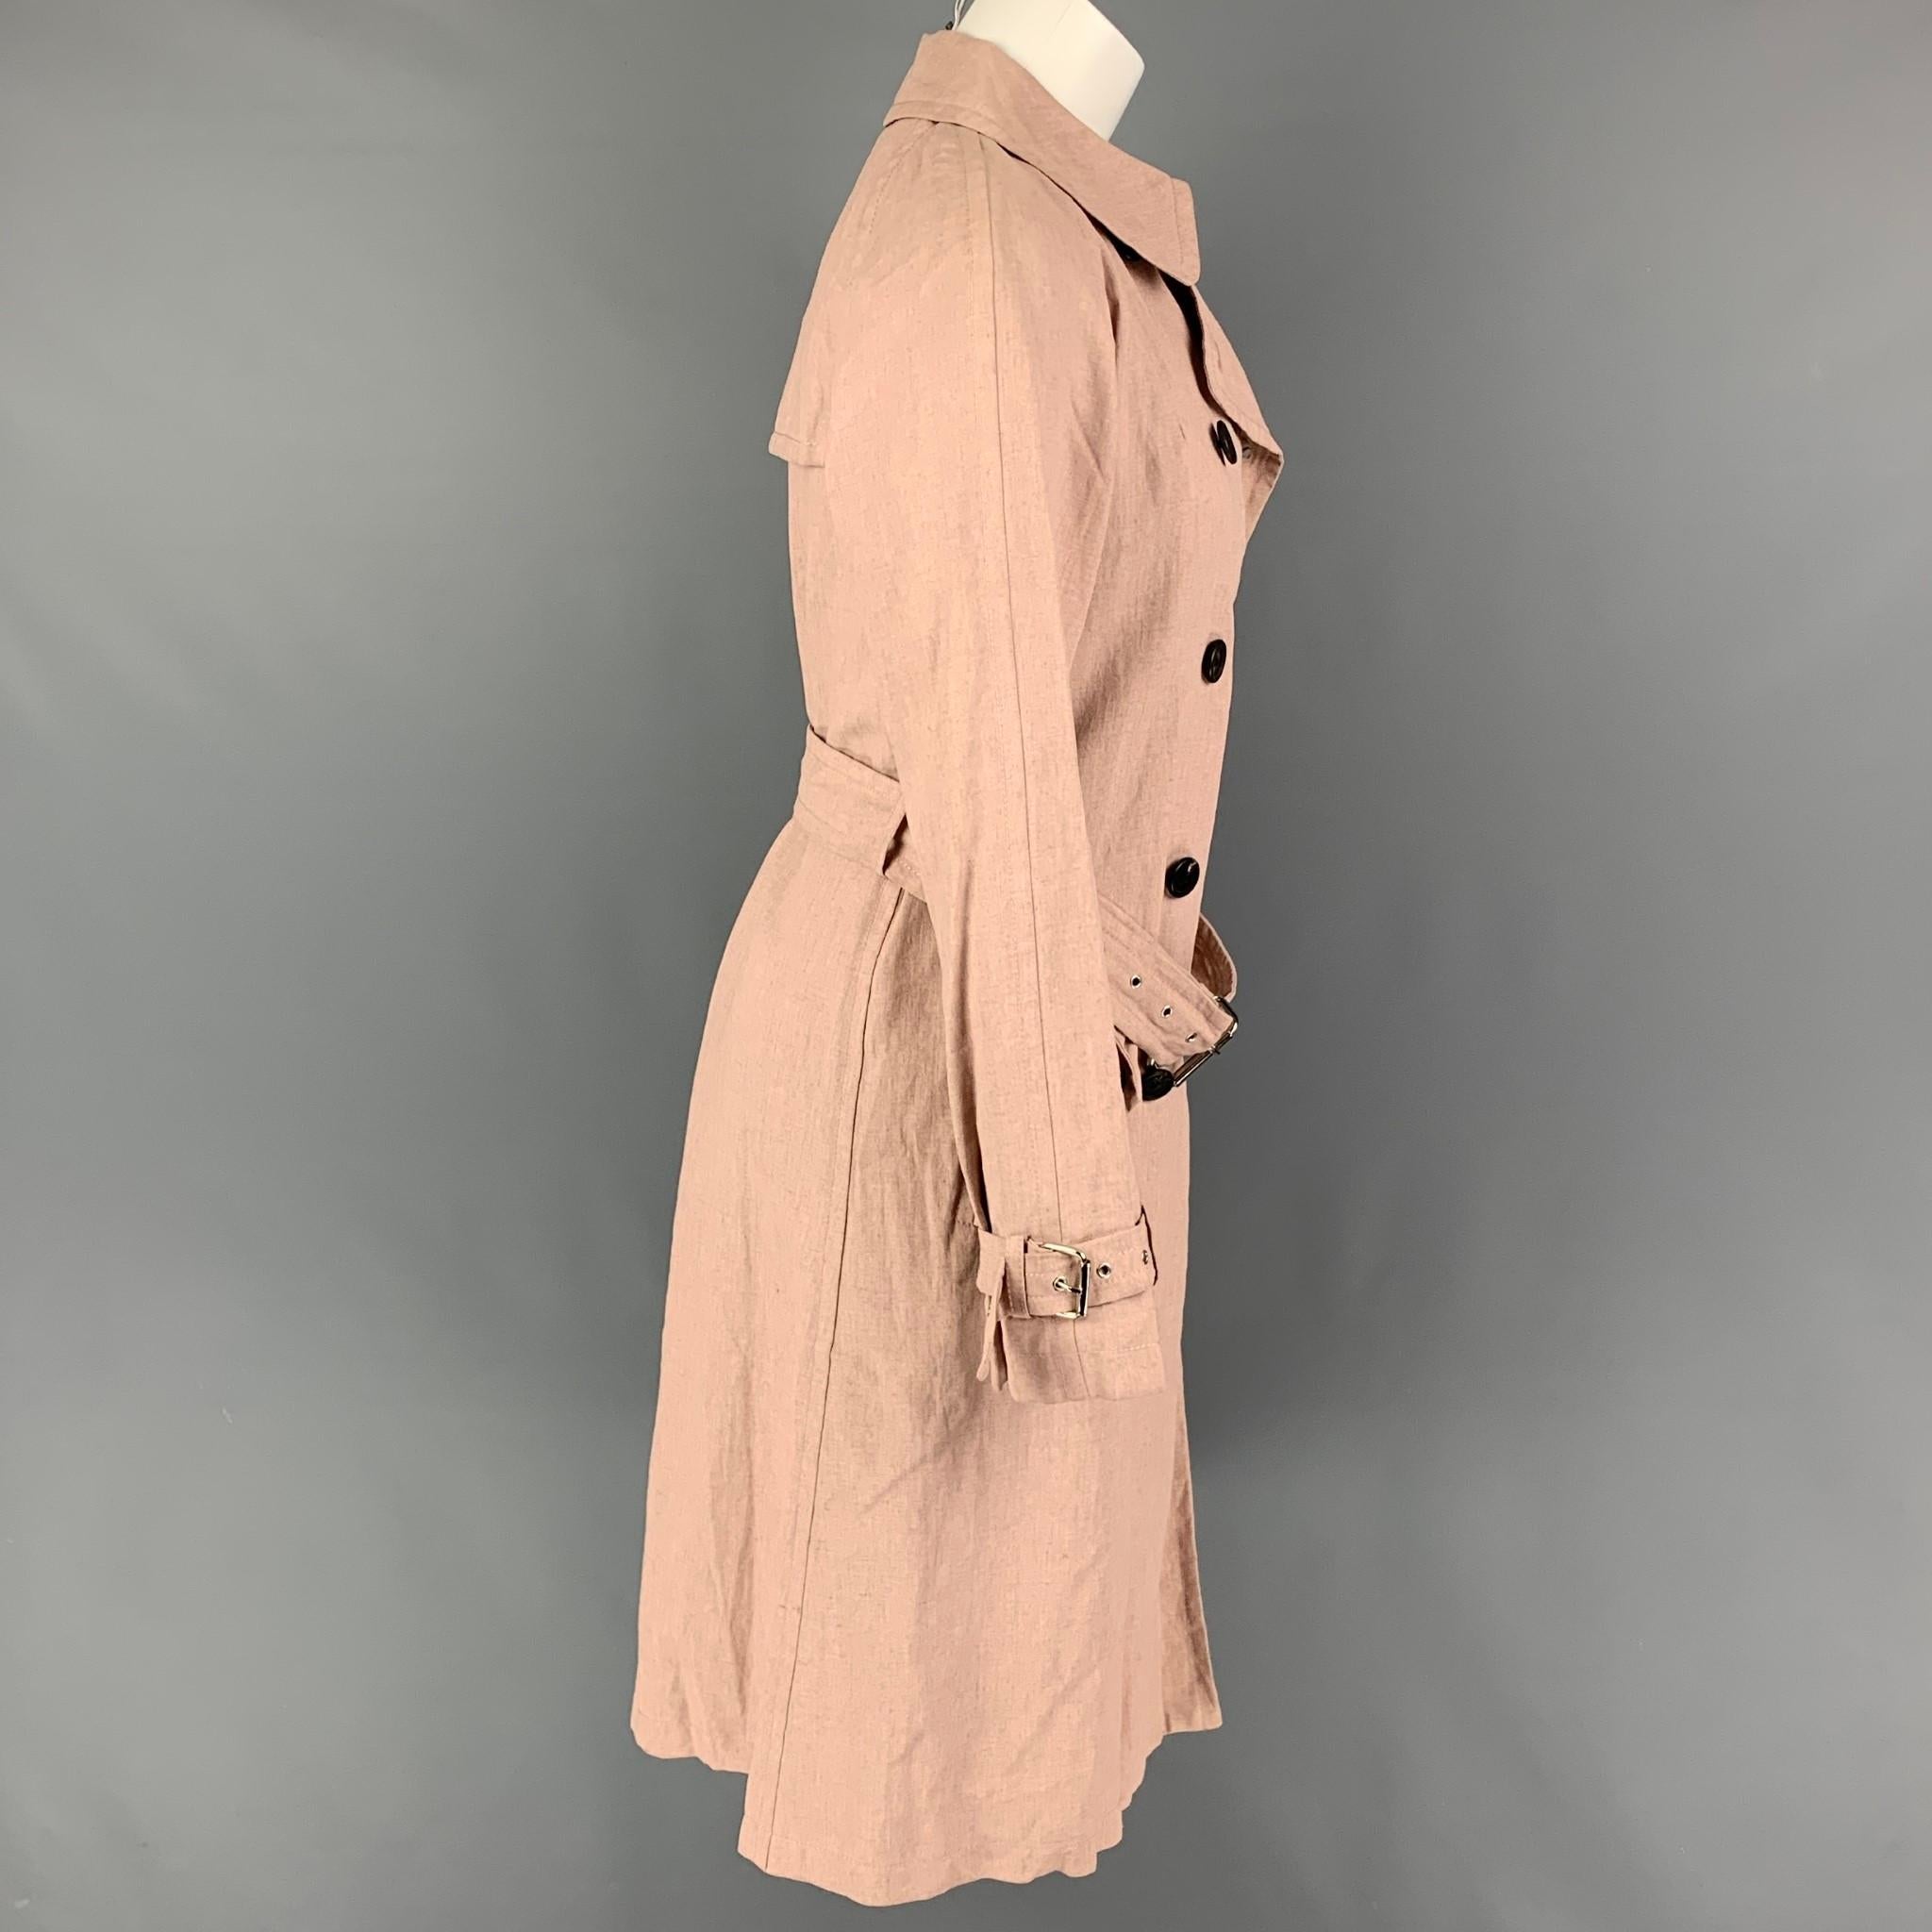 MARC JACOBS trench coat comes in a pink linen featuring a belted design, flap pockets, single back vent, amd a double breasted closure. Made in USA. 

Very Good Pre-Owned Condition.
Marked: 2

Measurements:

Shoulder: 16 in.
Bust: 36 in.
Sleeve: 23